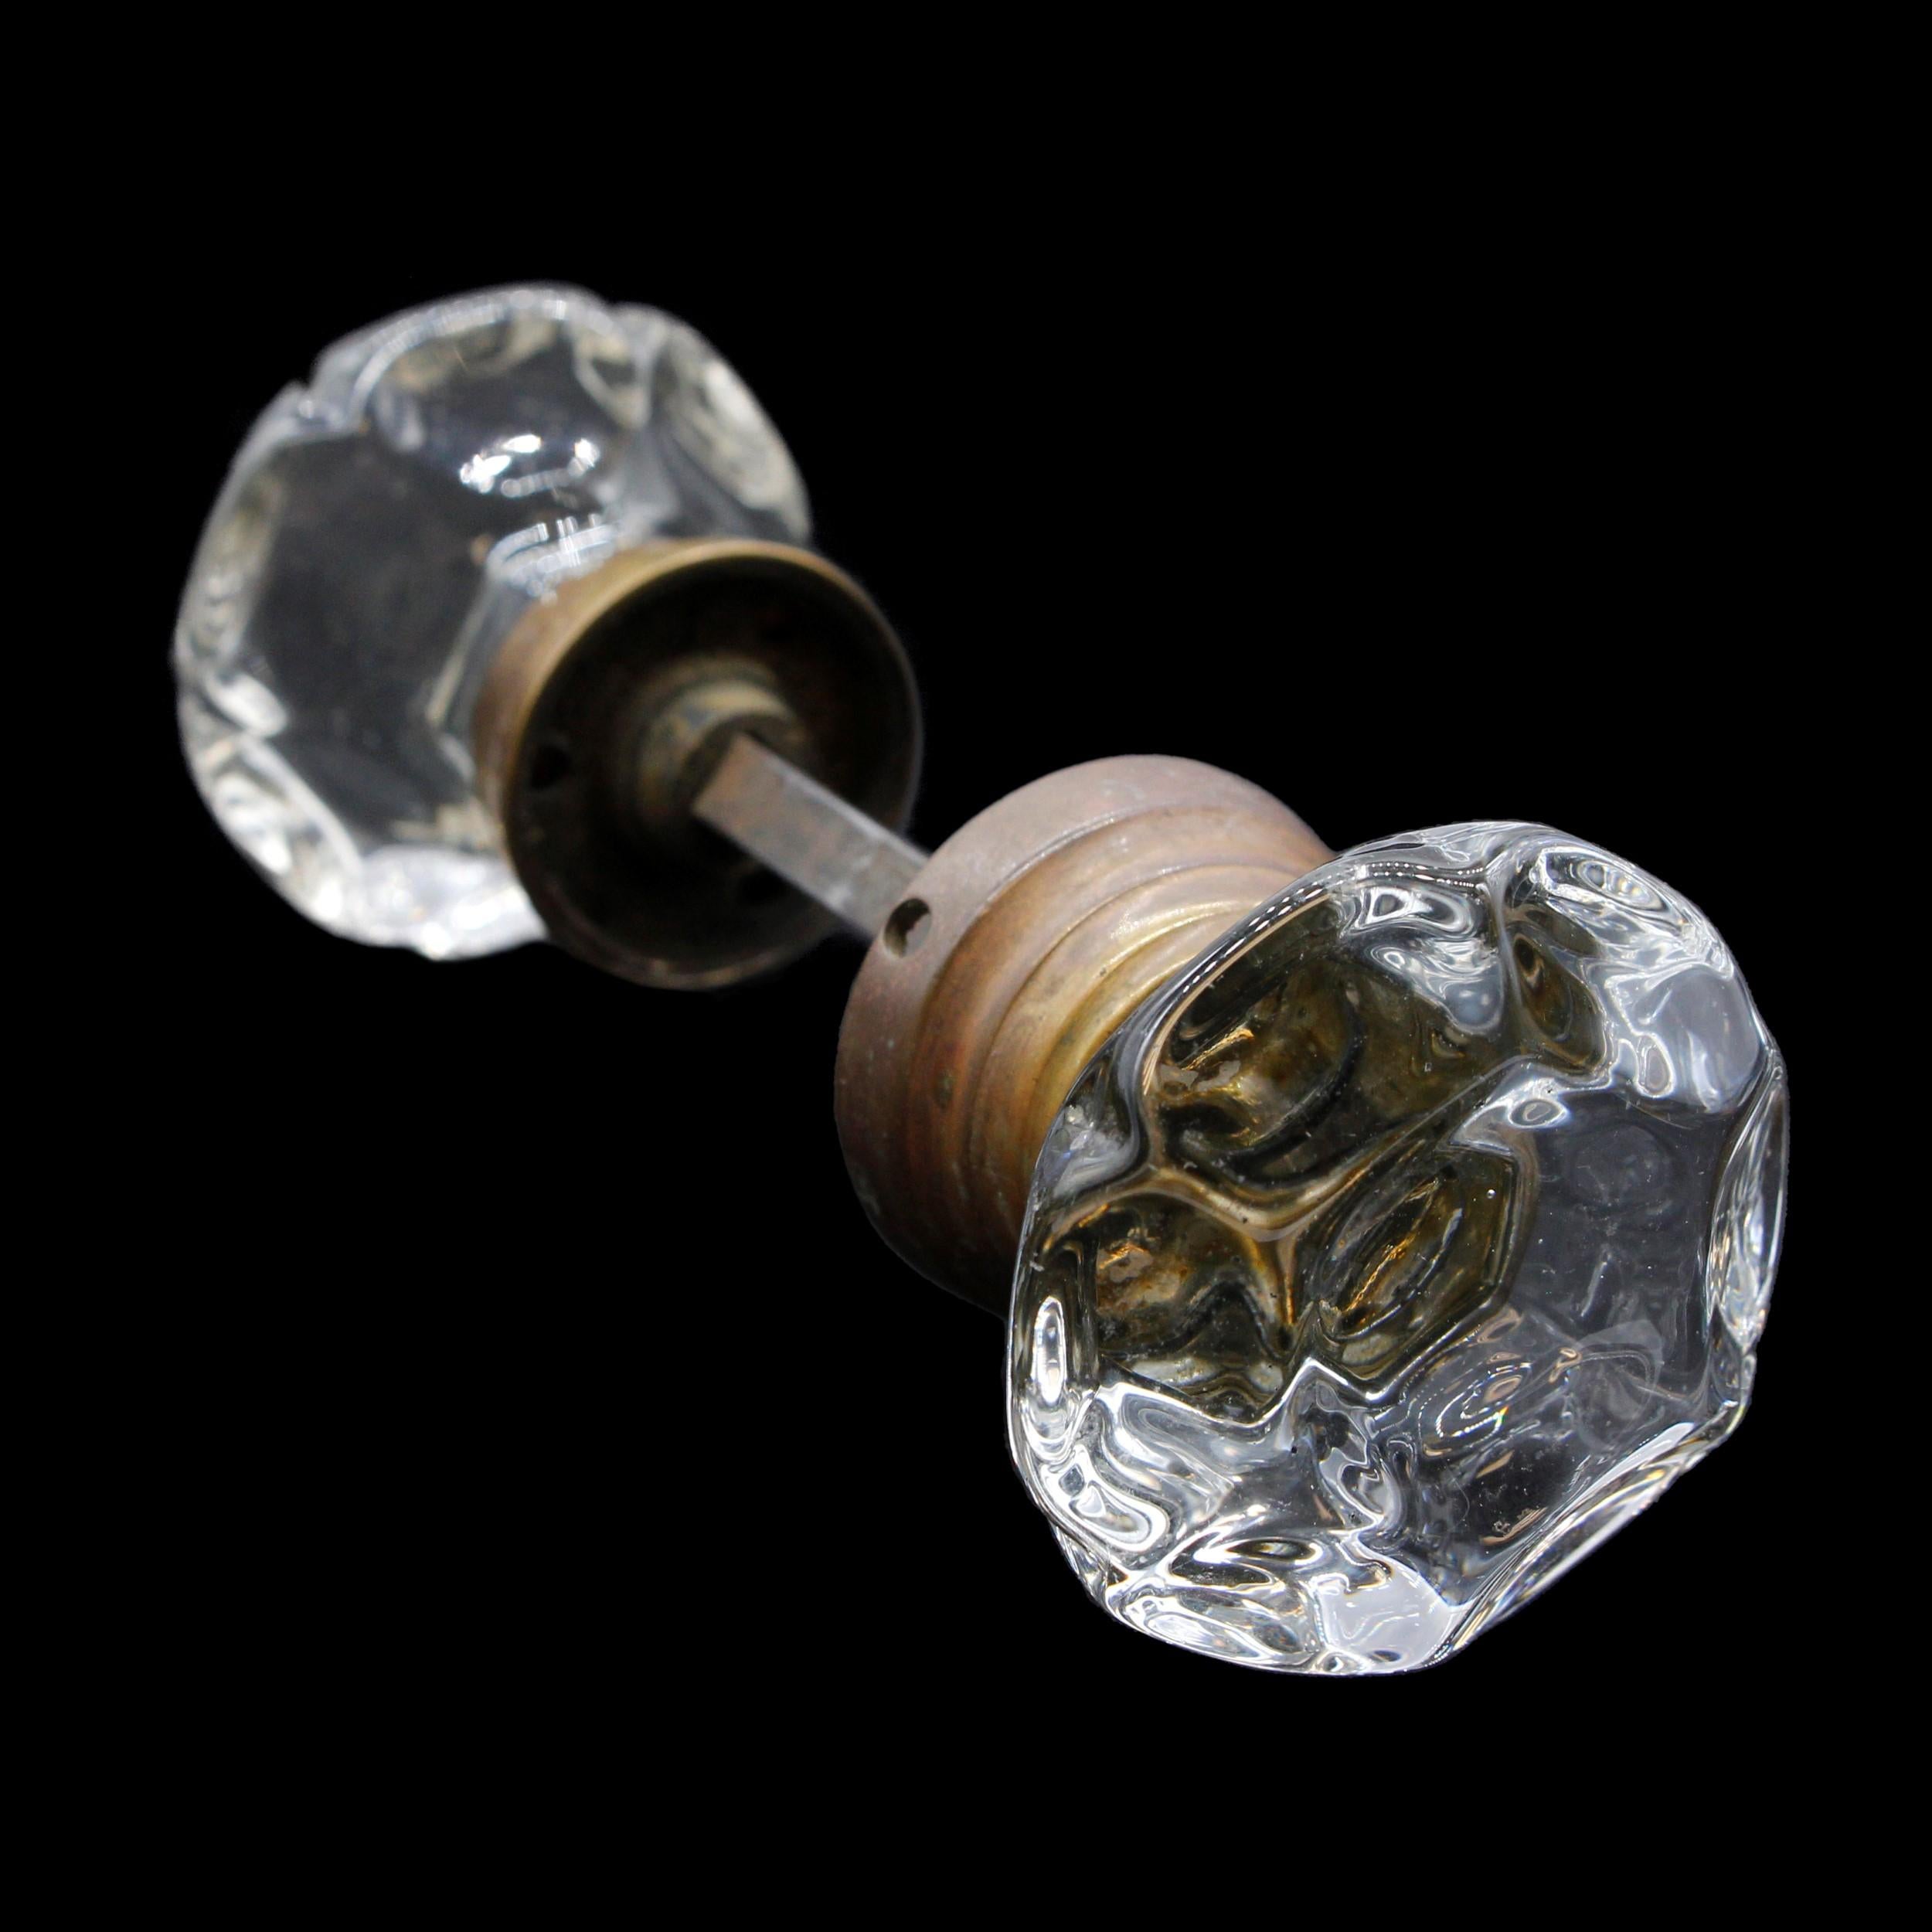 Unusual pair of early 20th Century doorknobs. These feature a center X and punted glass design. Brass hardware. This can be seen at our 400 Gilligan St location in Scranton, PA.